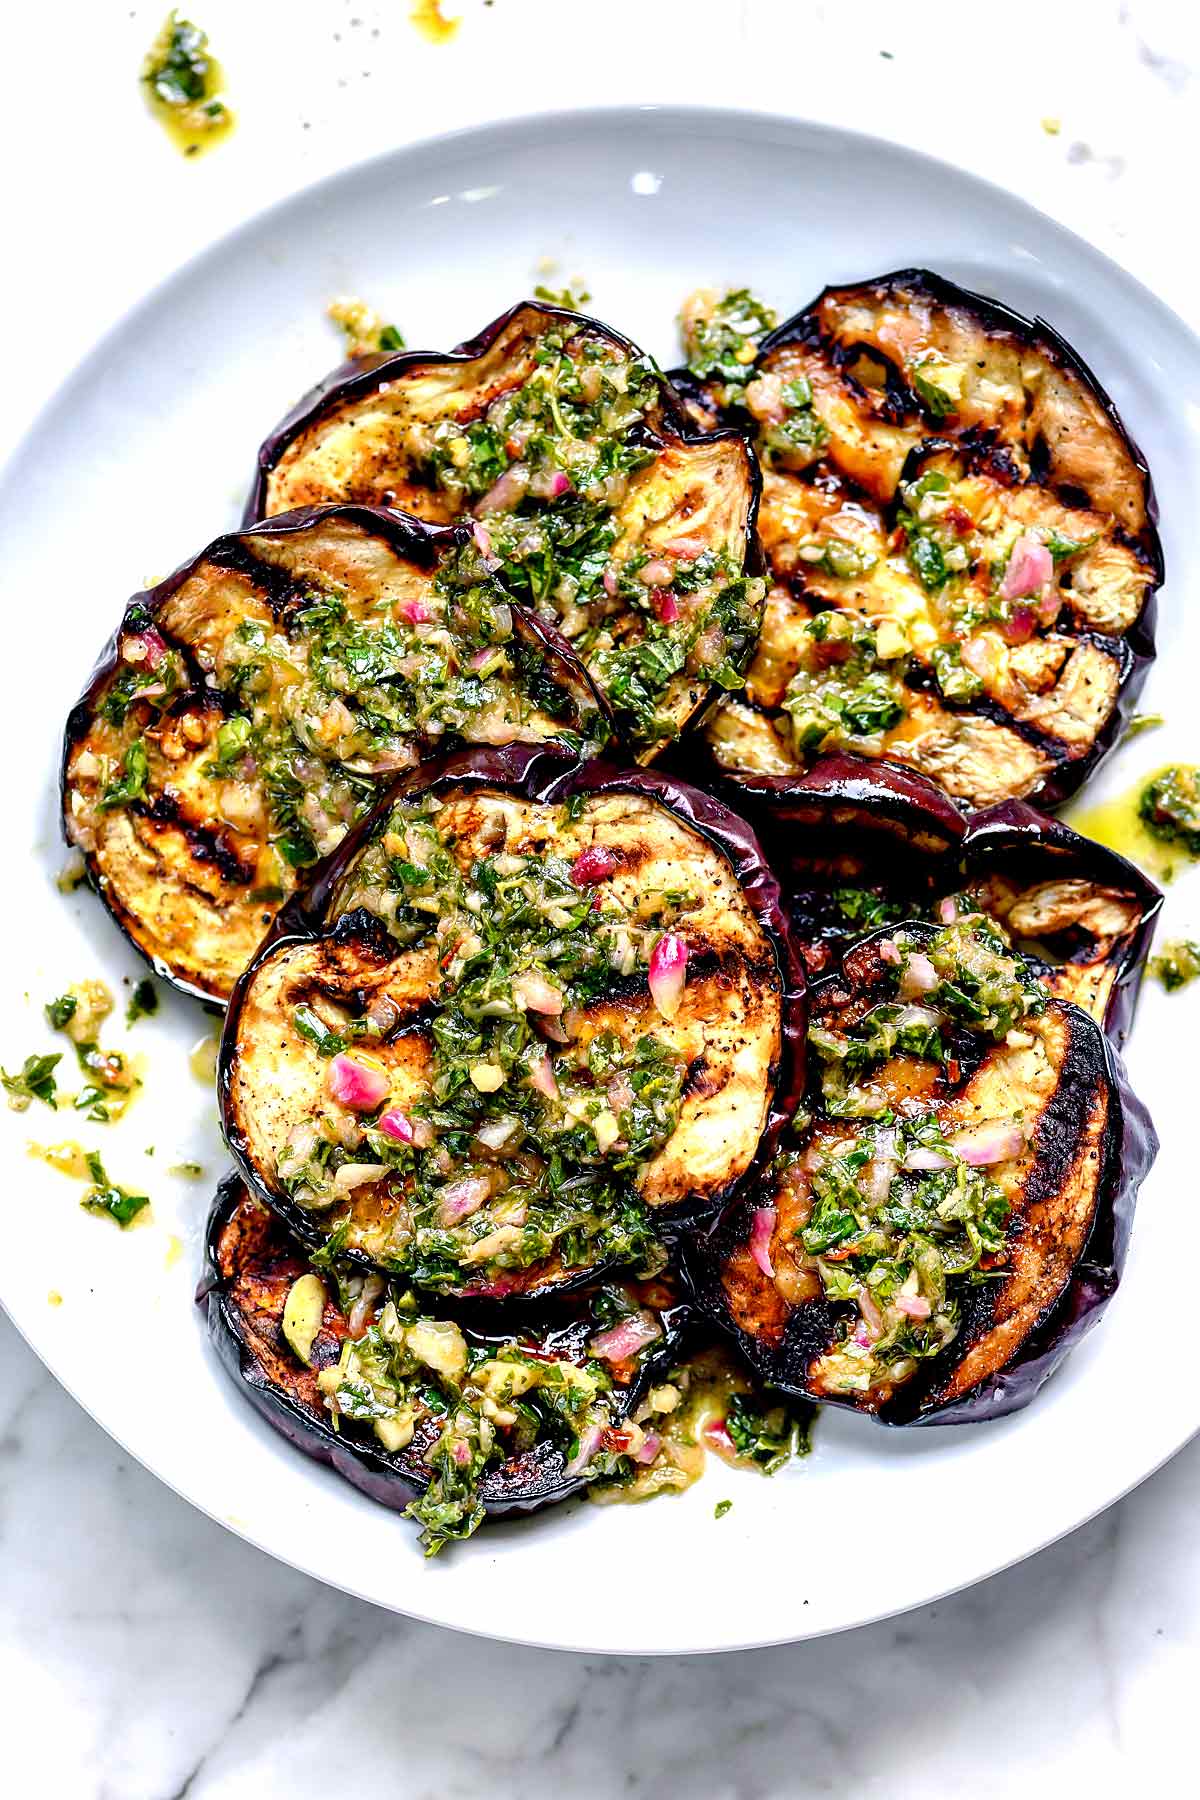 Grilled Eggplant with Chimichurri from foodiecrush.com on foodiecrush.com